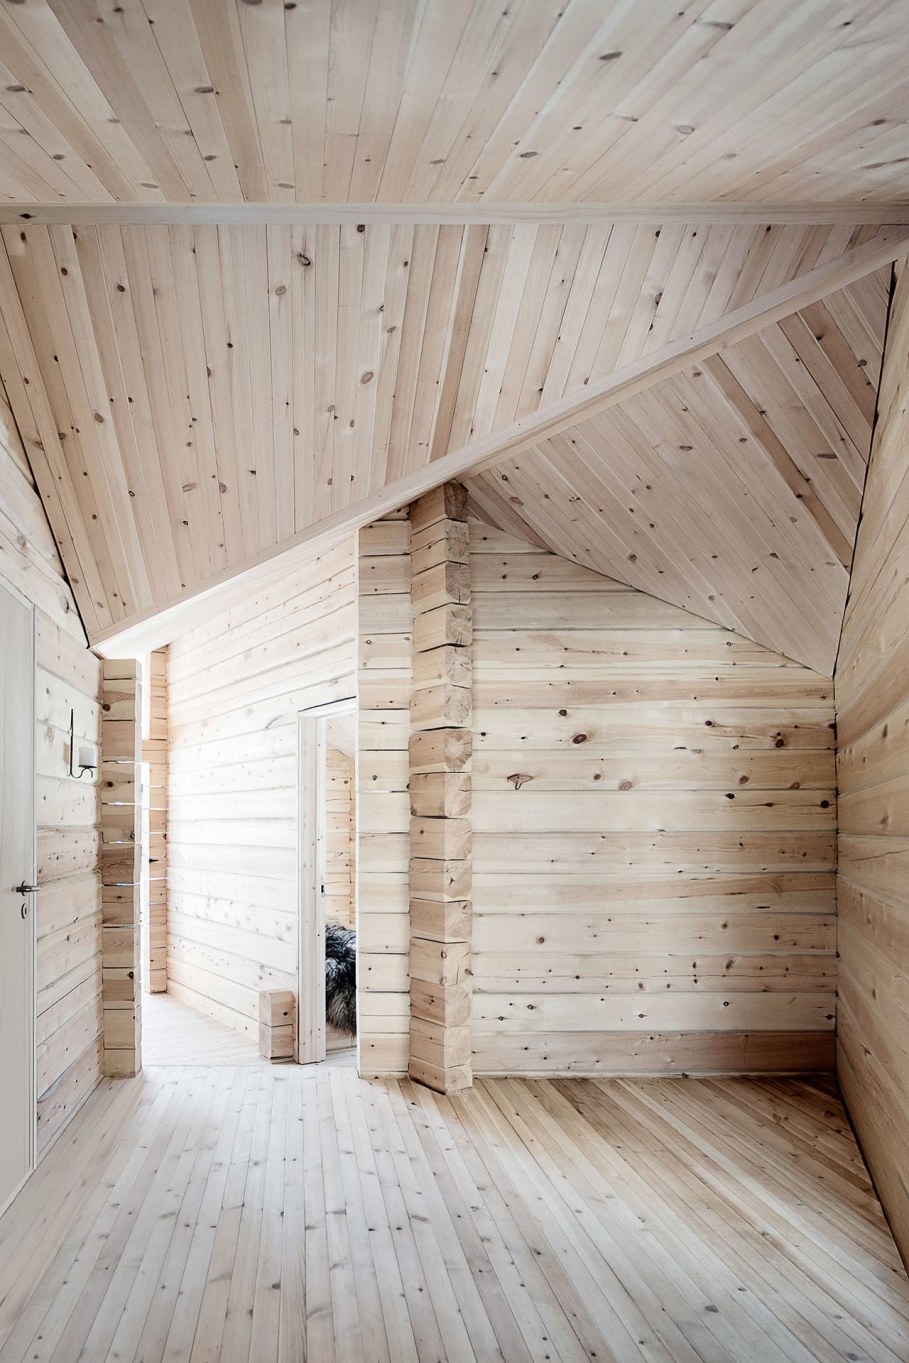 The wooden house in Norway - interior